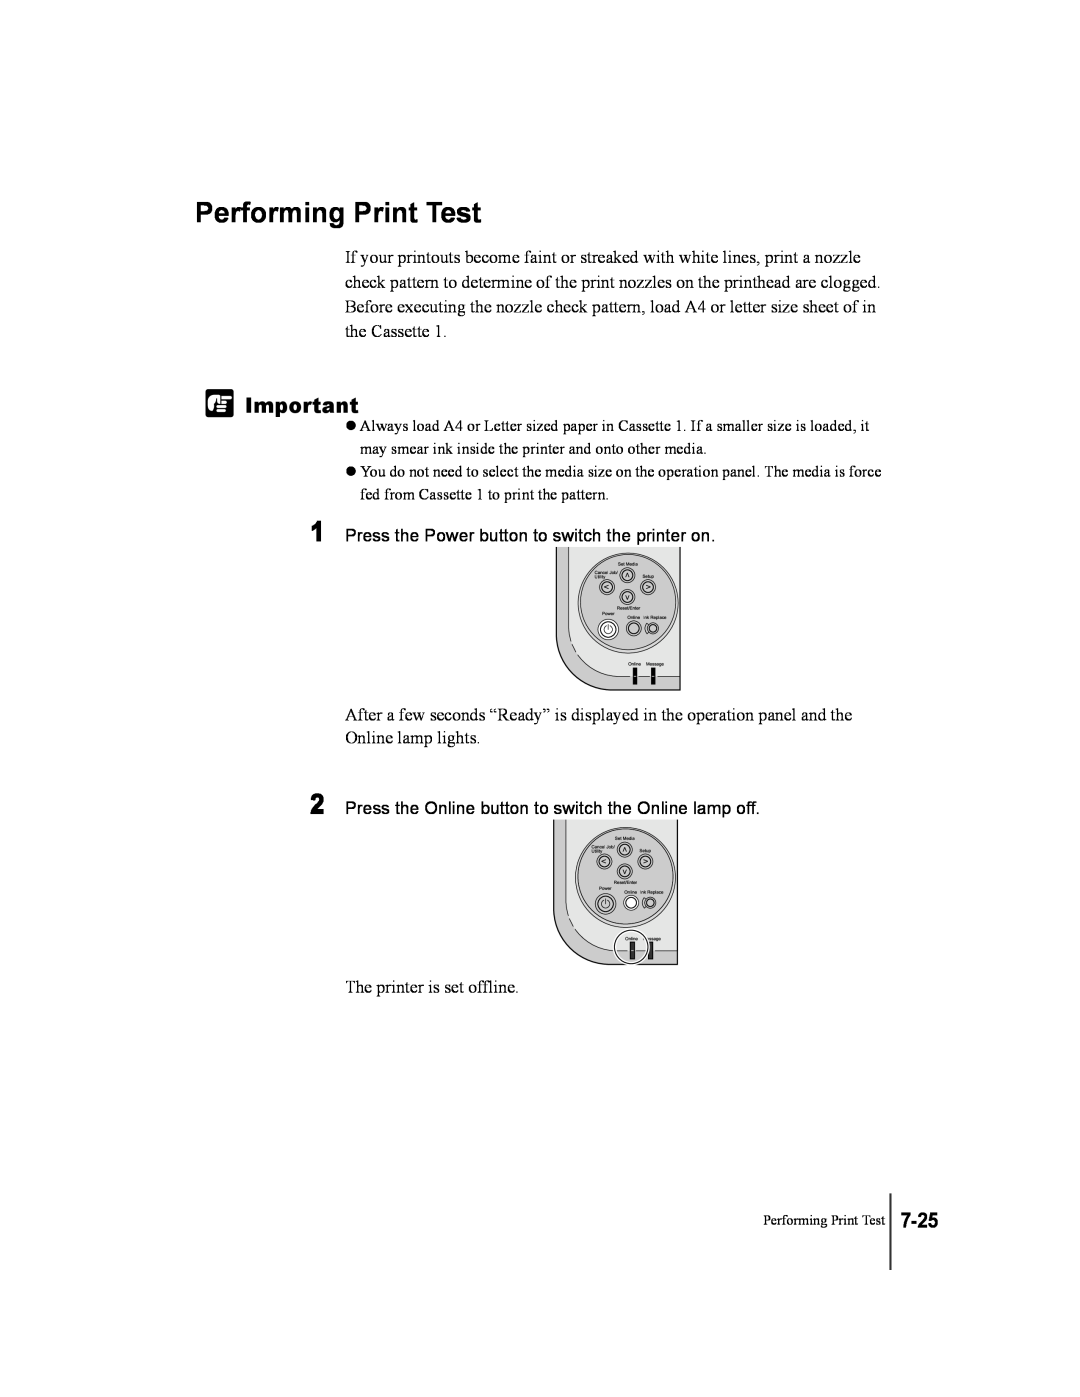 Canon W2200 manual Performing Print Test, 7-25, Press the Power button to switch theprinter on 